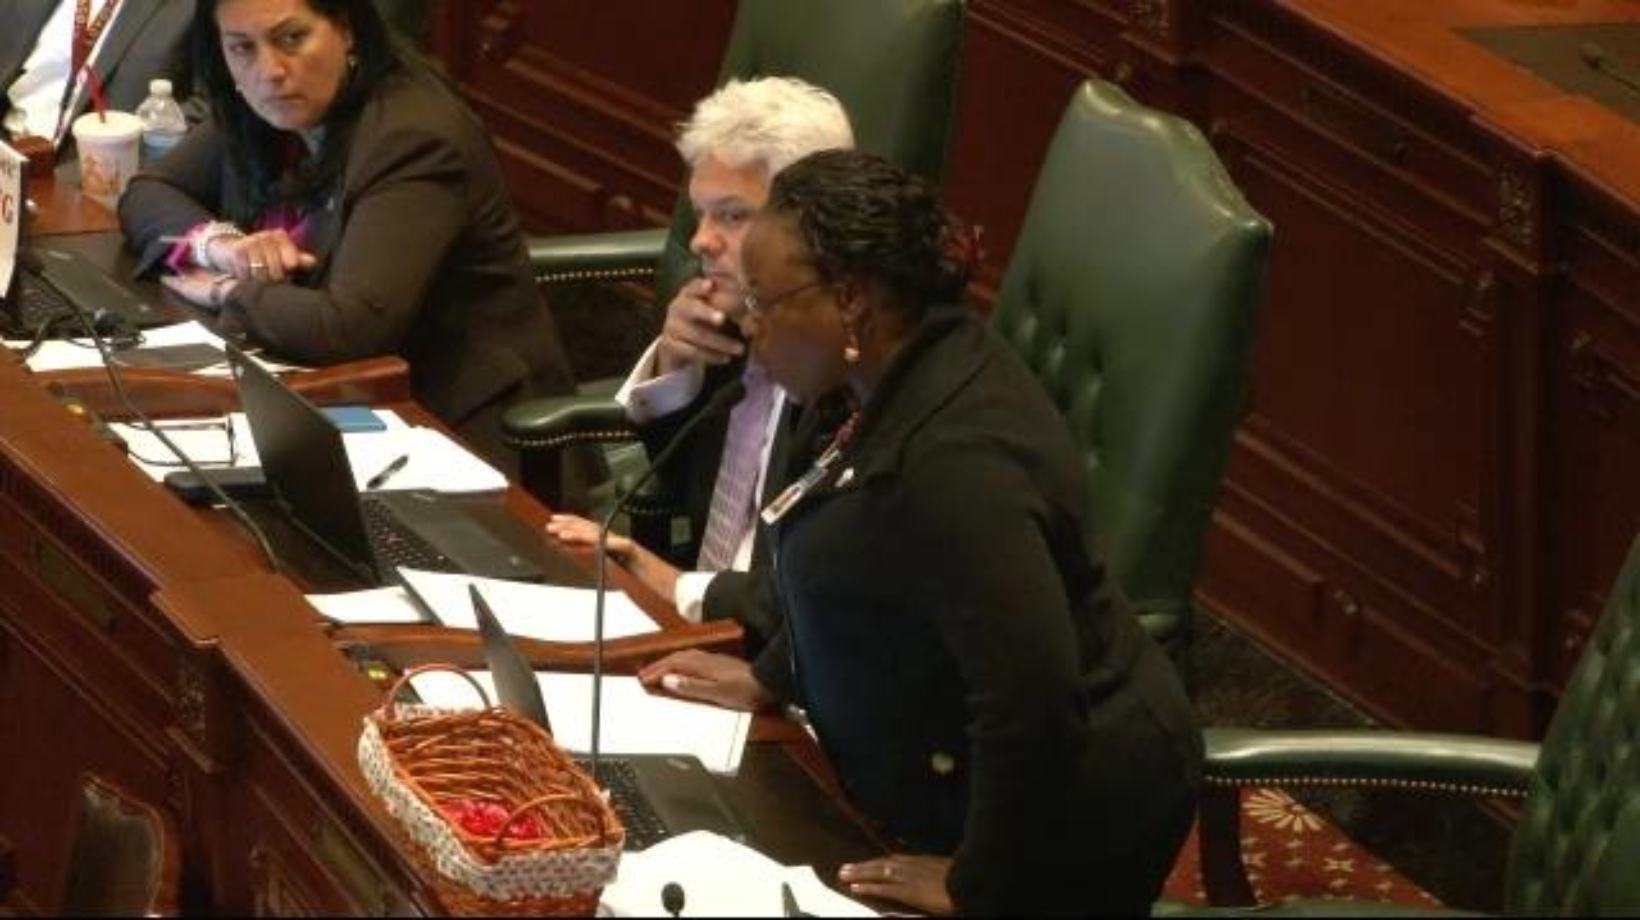 Illinois state Rep. Carol Ammons, D-Urbana, introduced HB 3447 to which McHenry County officials and others disapprove of.